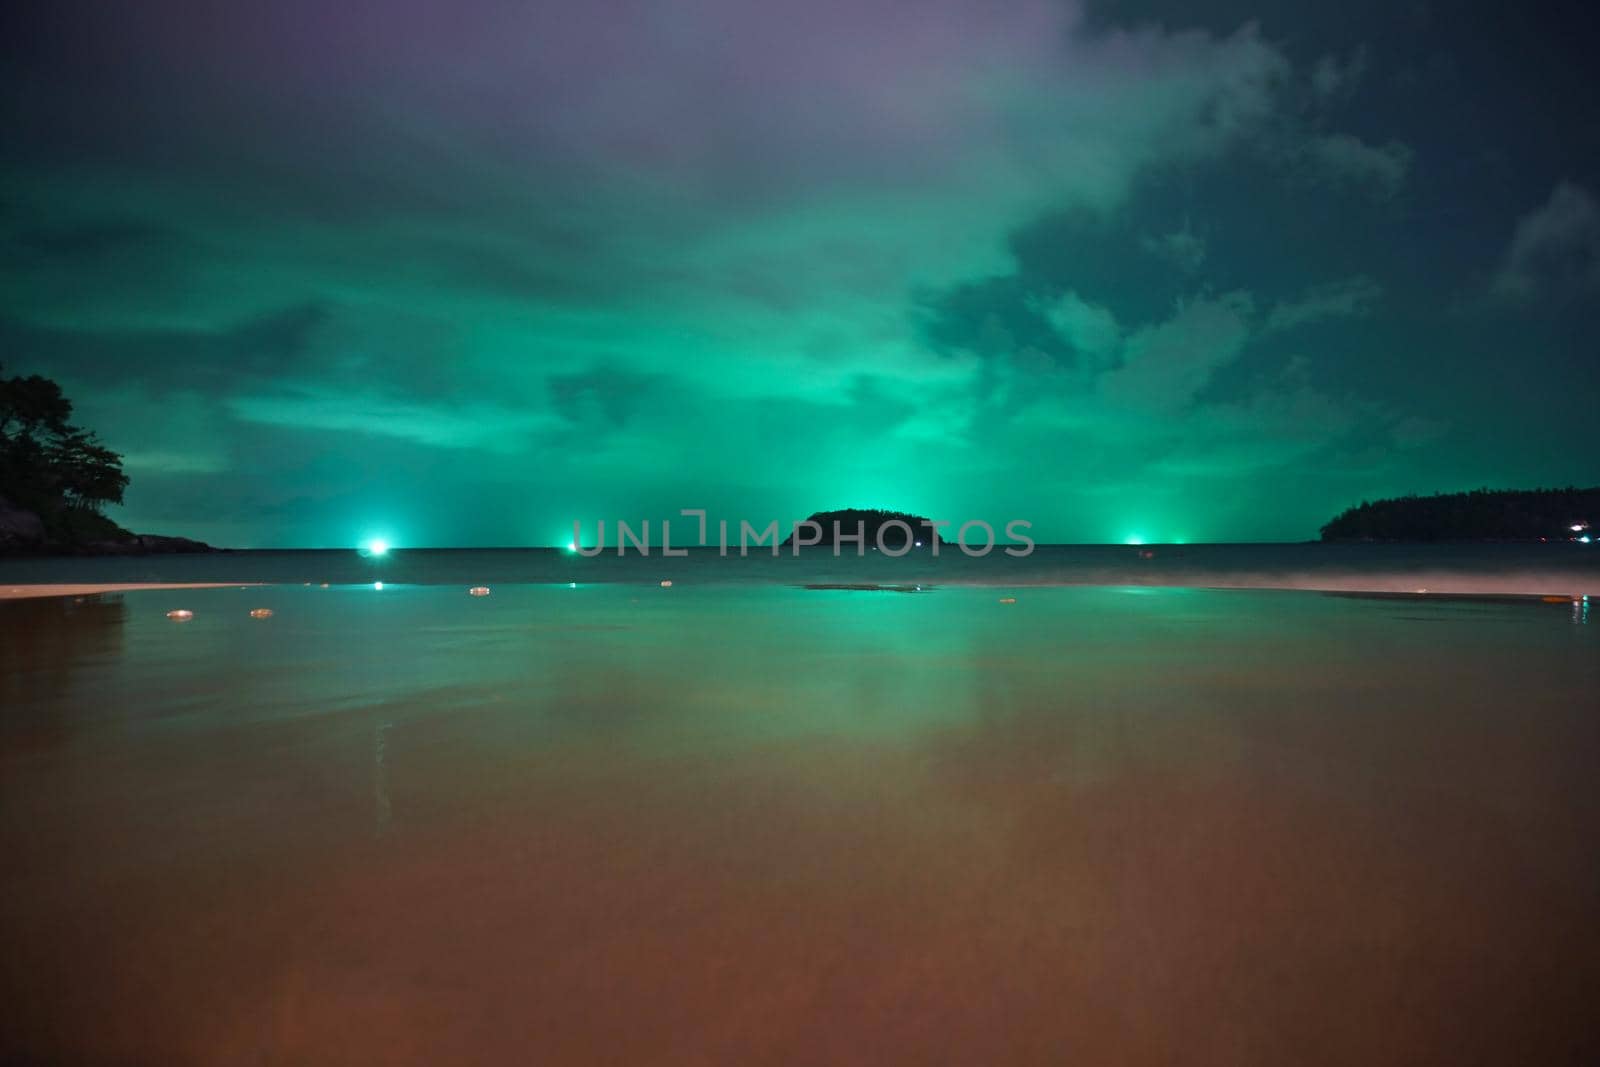 Unusual green illumination of the sky on island by Passcal